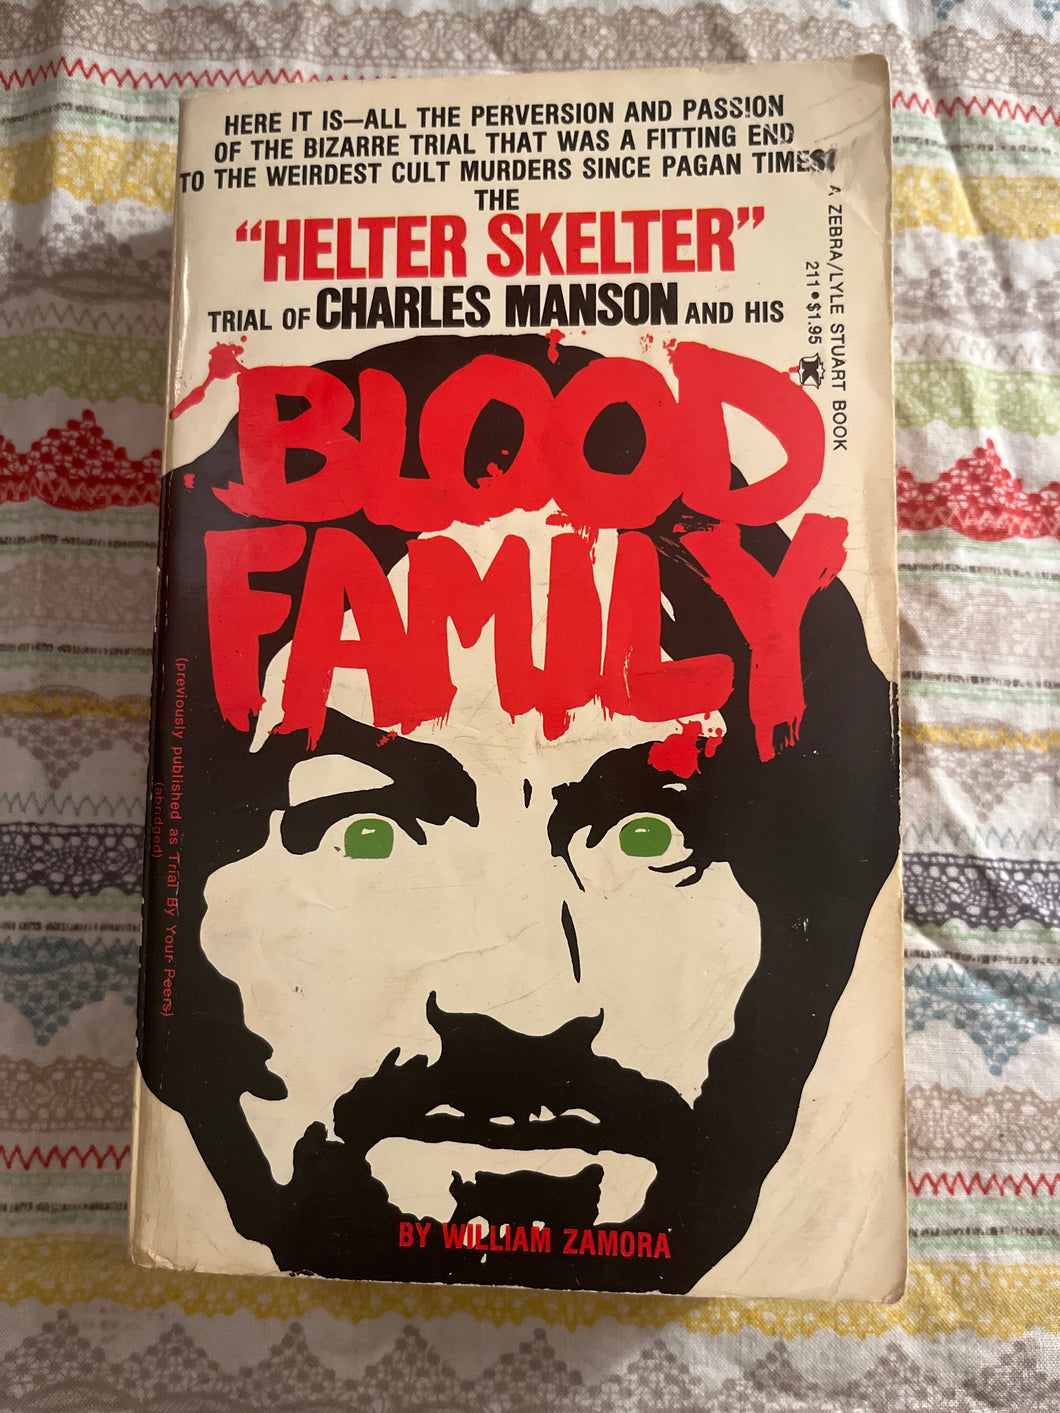 Blood Family